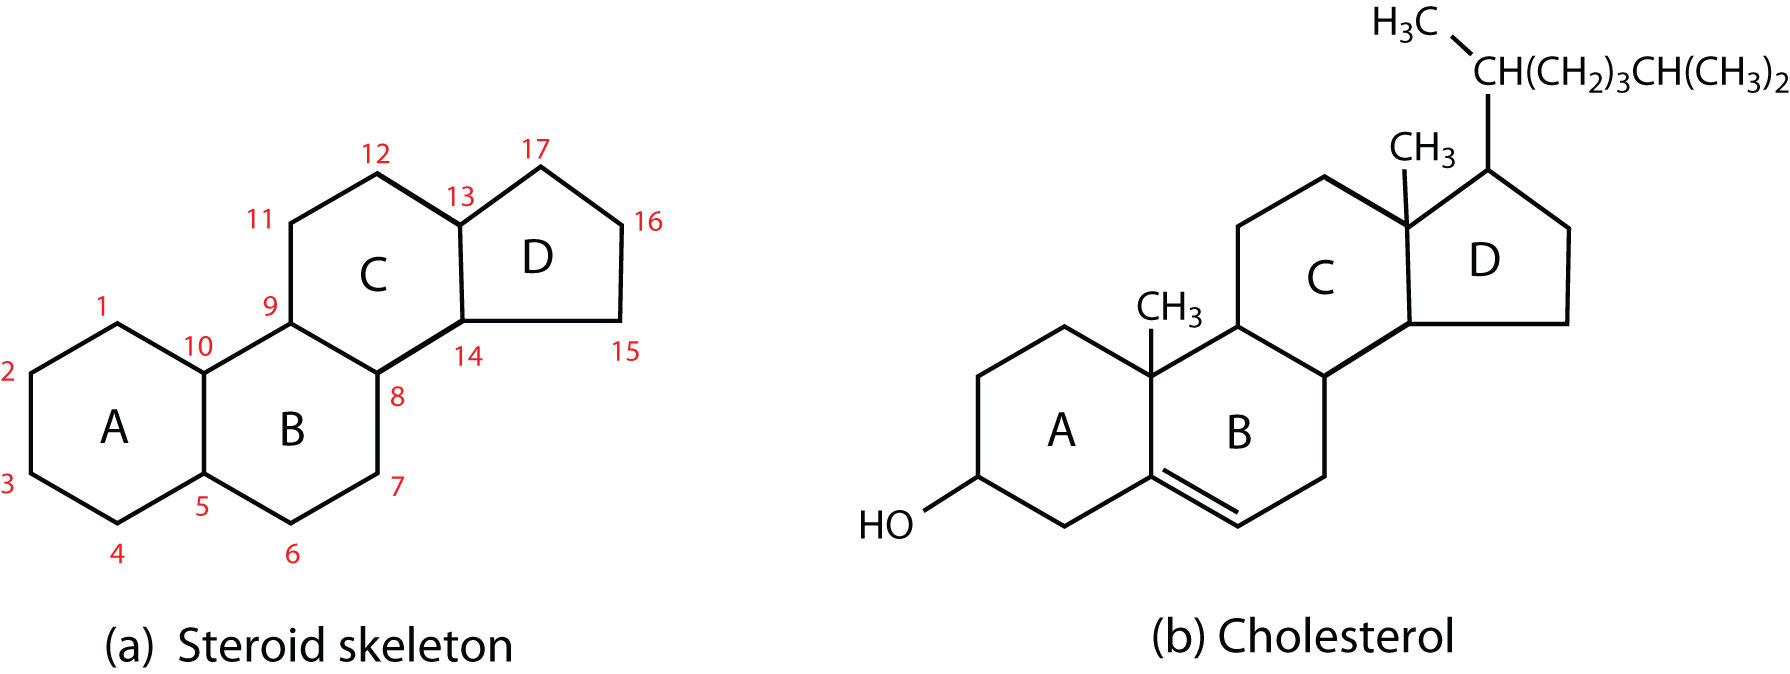 Structures of a) a steroid skeleton and b) cholesterol